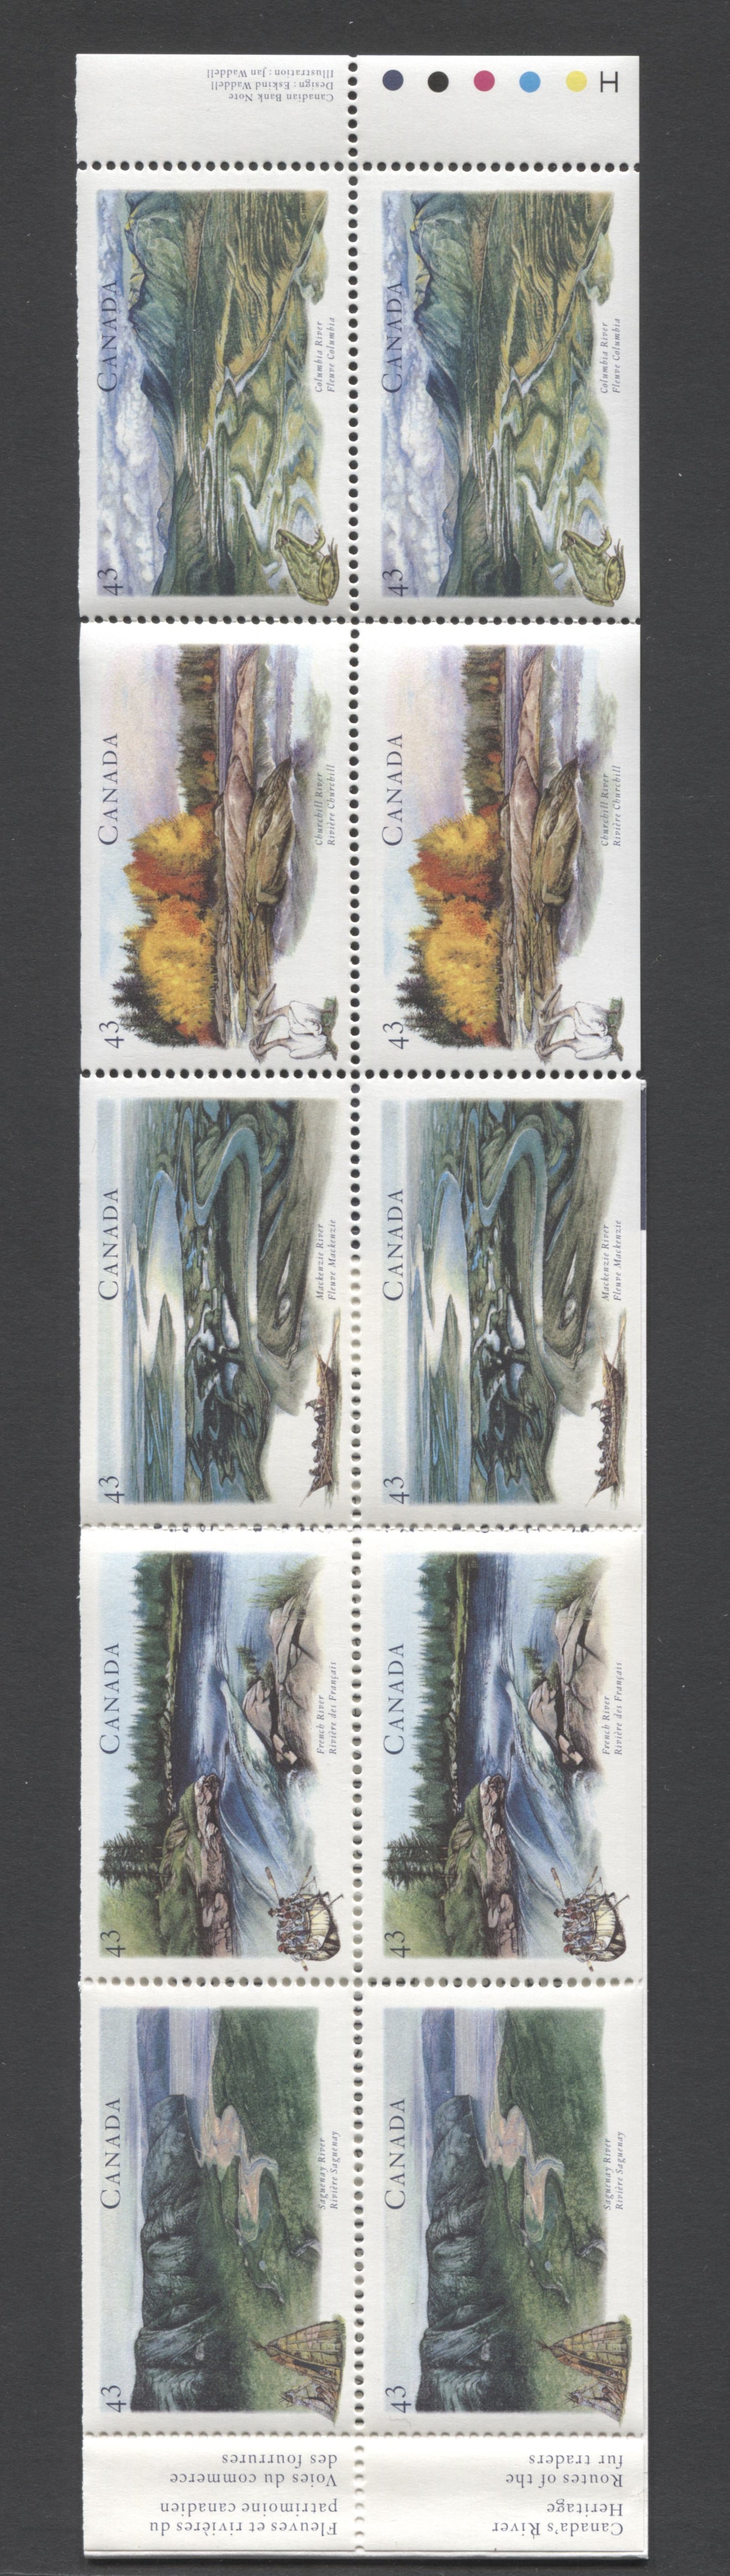 Canada #BK170a-b 1994 Heritage Rivers Issue, Complete $4.30 Booklet, Harrison Paper, Dead Paper, 4 mm GT-4 Tagging